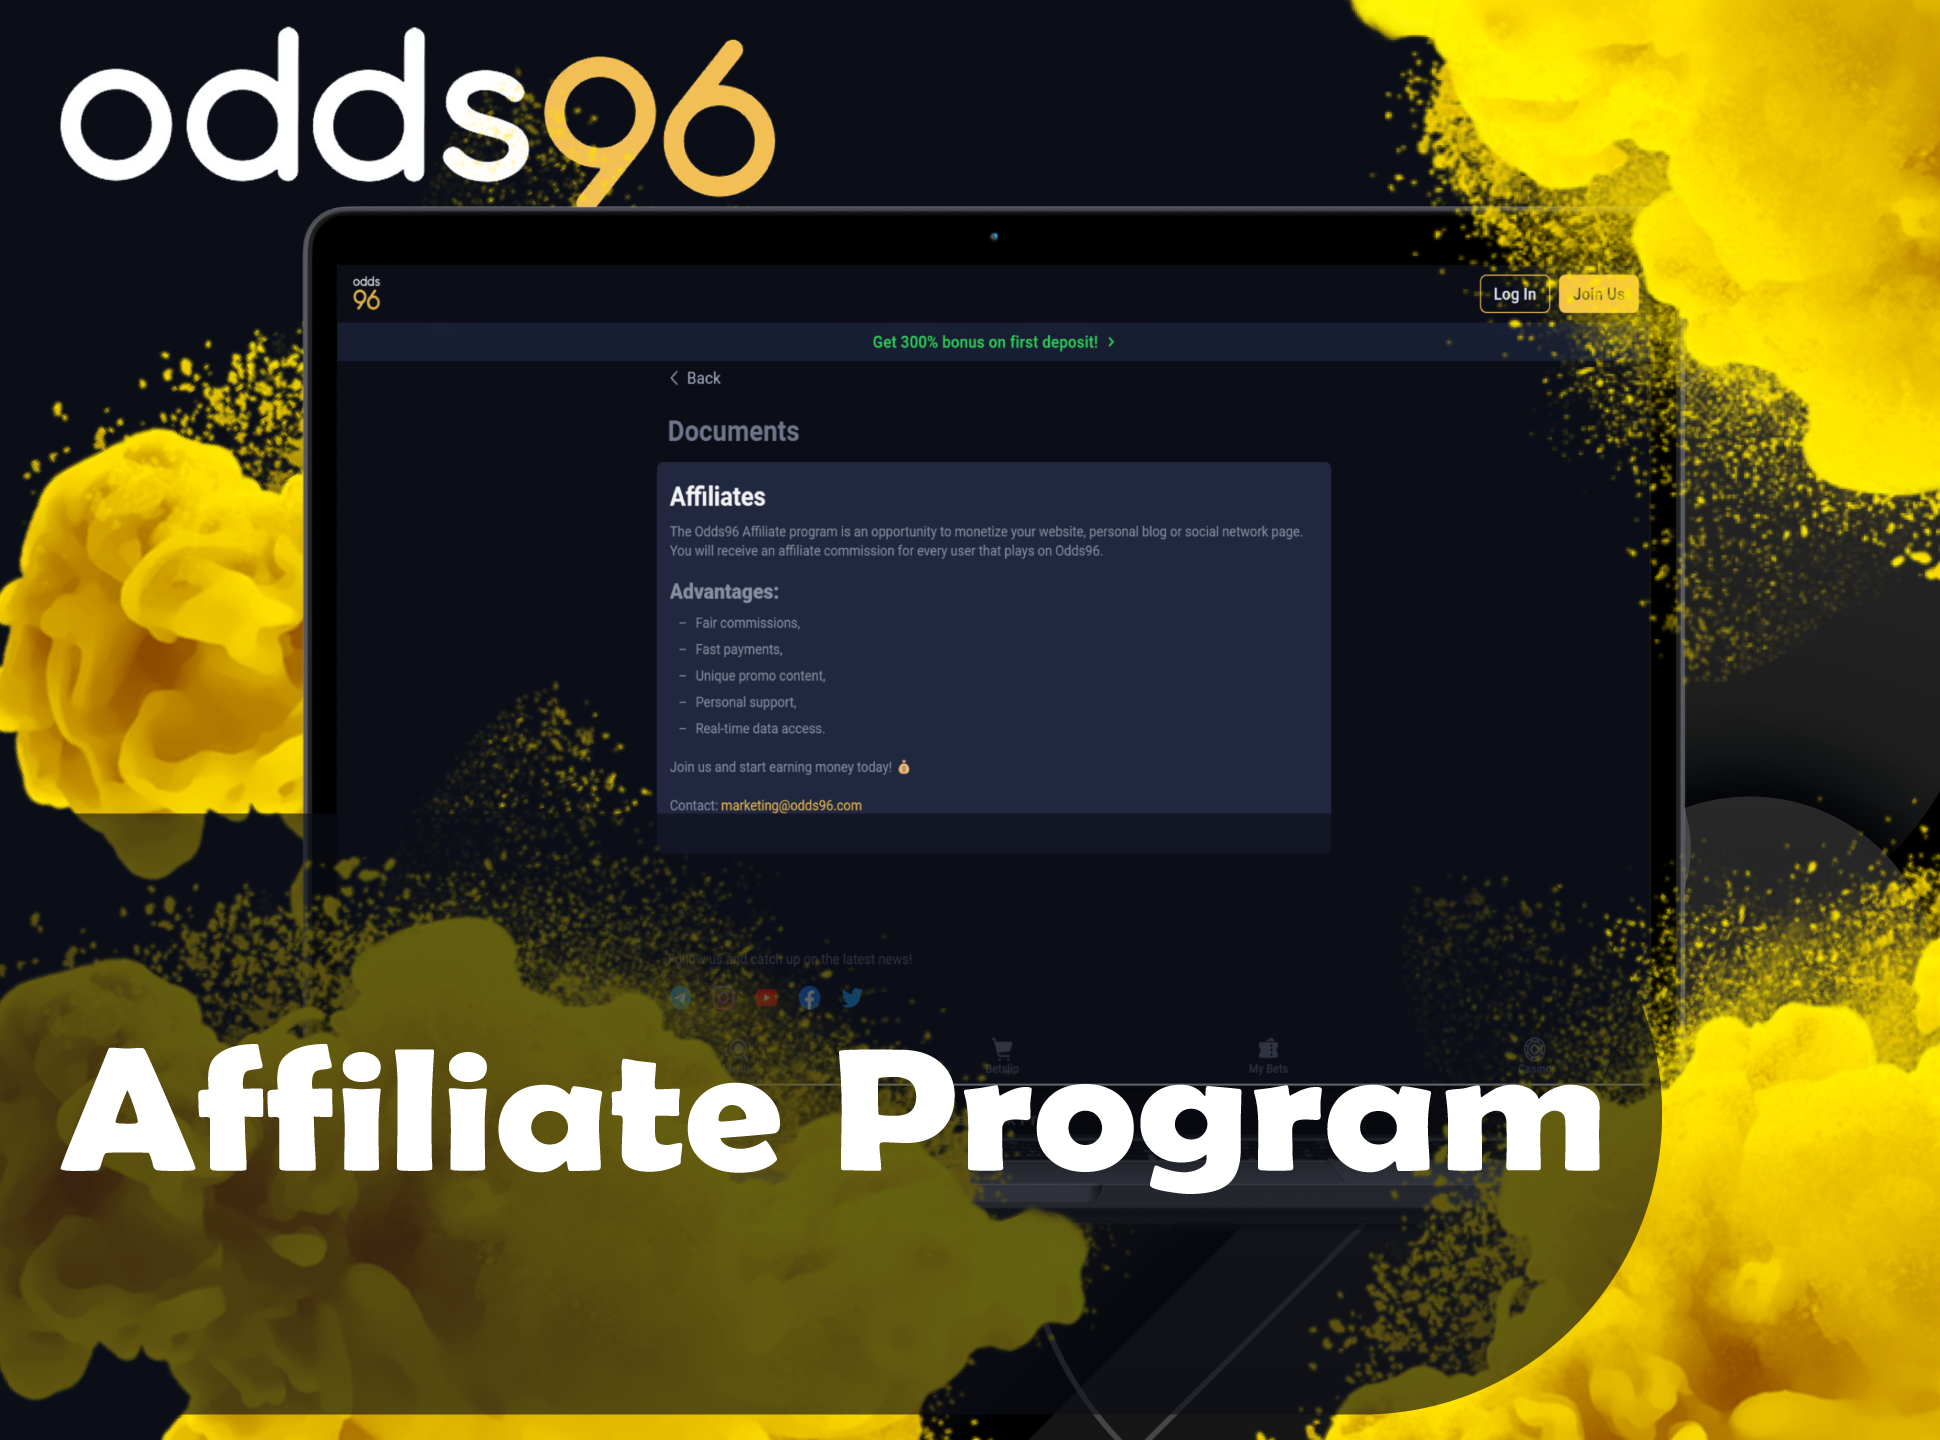 Use Odds96 affiliate program and invite your friends.